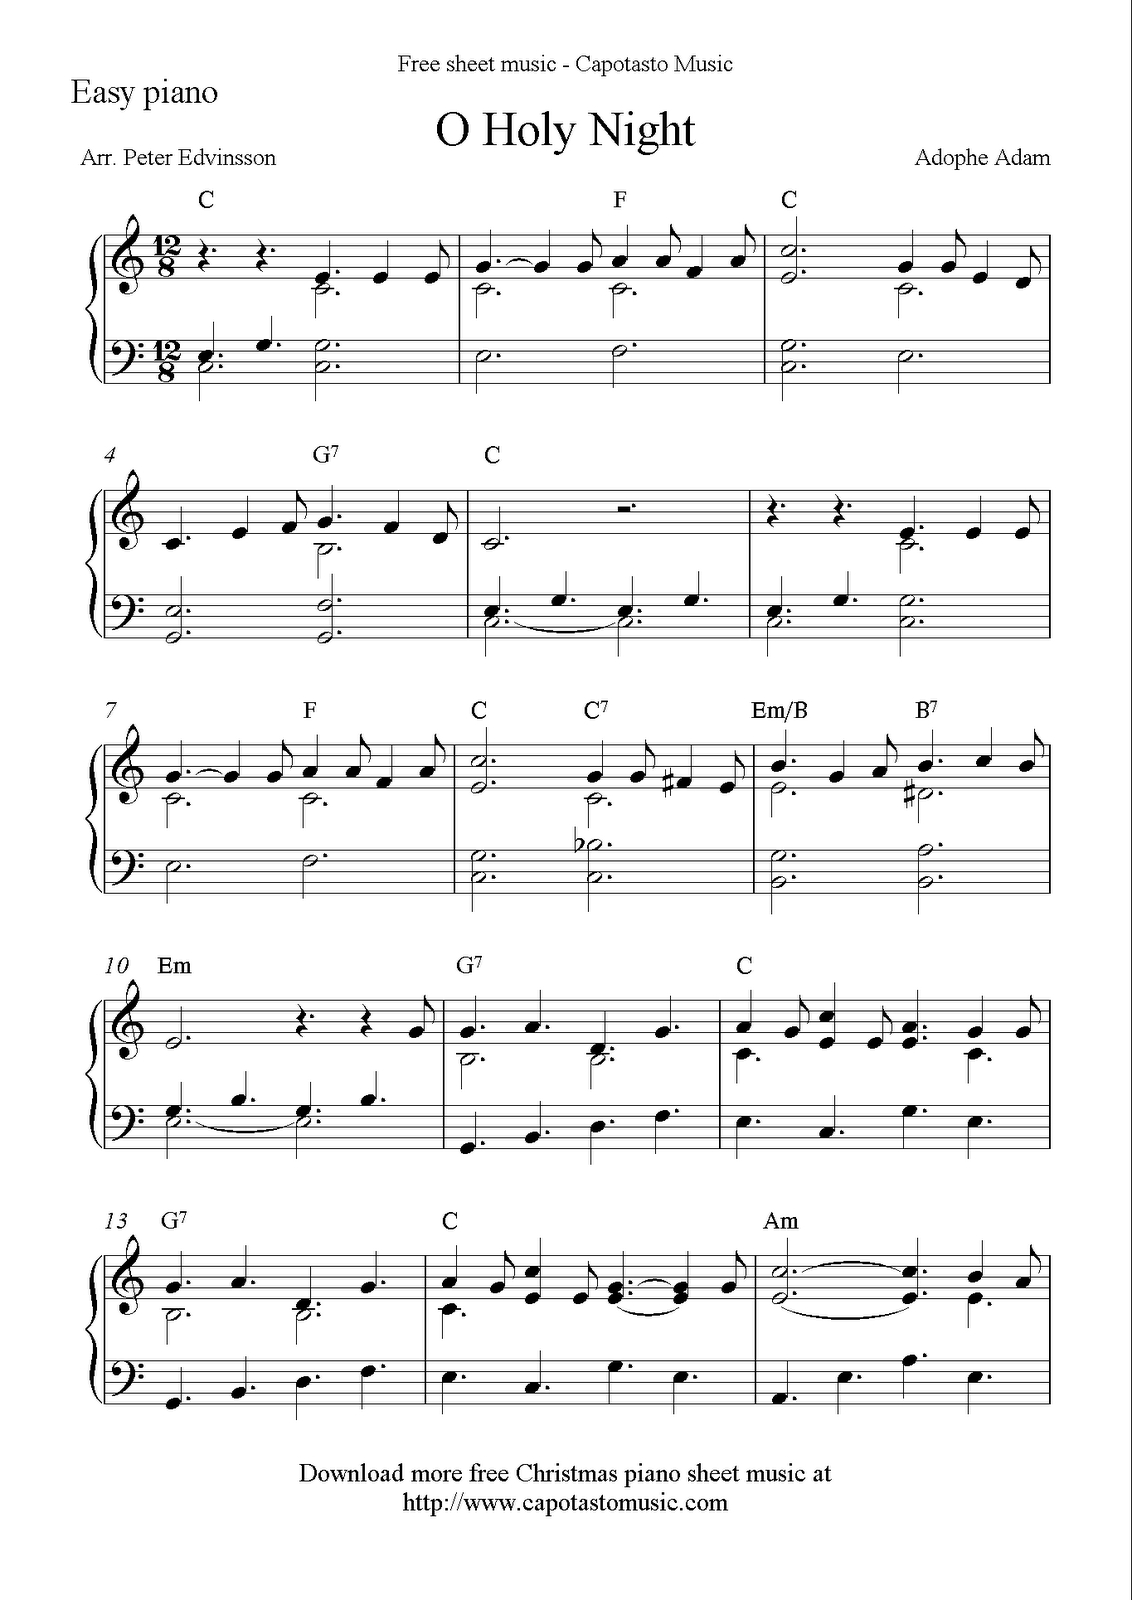 Free Sheet Music Scores: Free Easy Christmas Piano Sheet Music, O - Free Printable Christmas Sheet Music For Piano